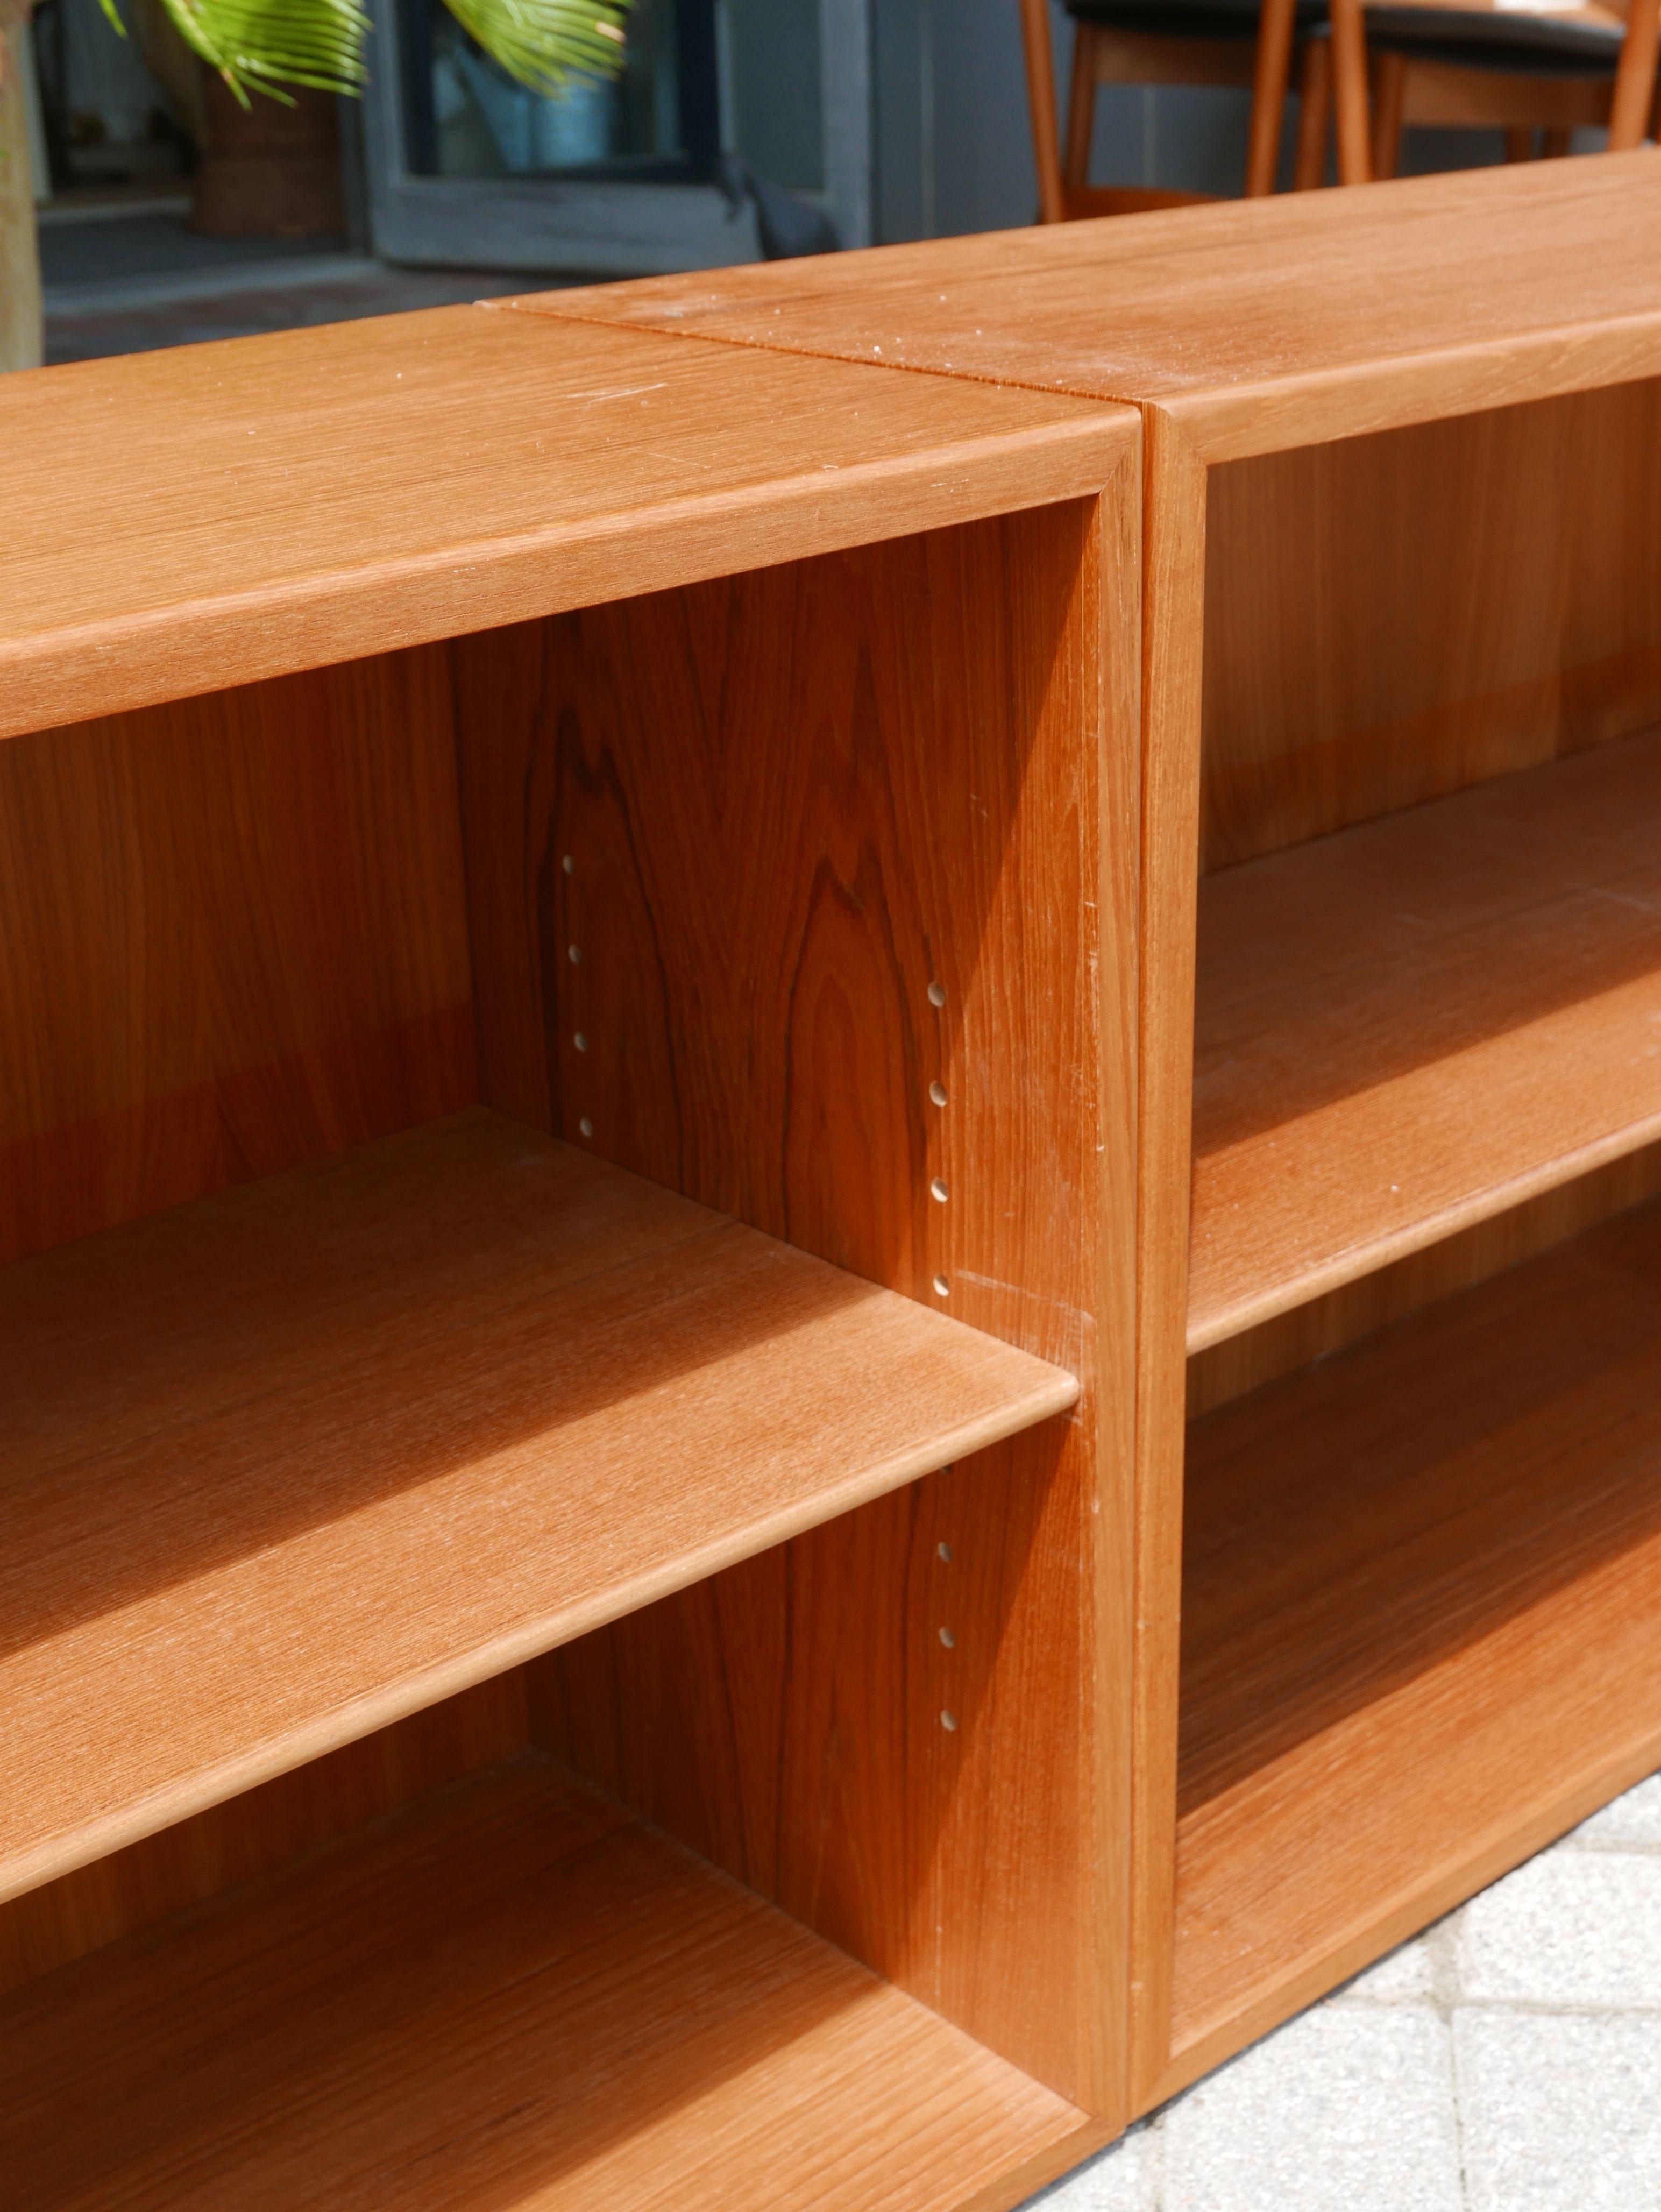 Great for use under windows or stacking one on top of the other. The adjustability of these bookcases is what sold me on them. Solid wood under the teak adds some strength to the shelving.